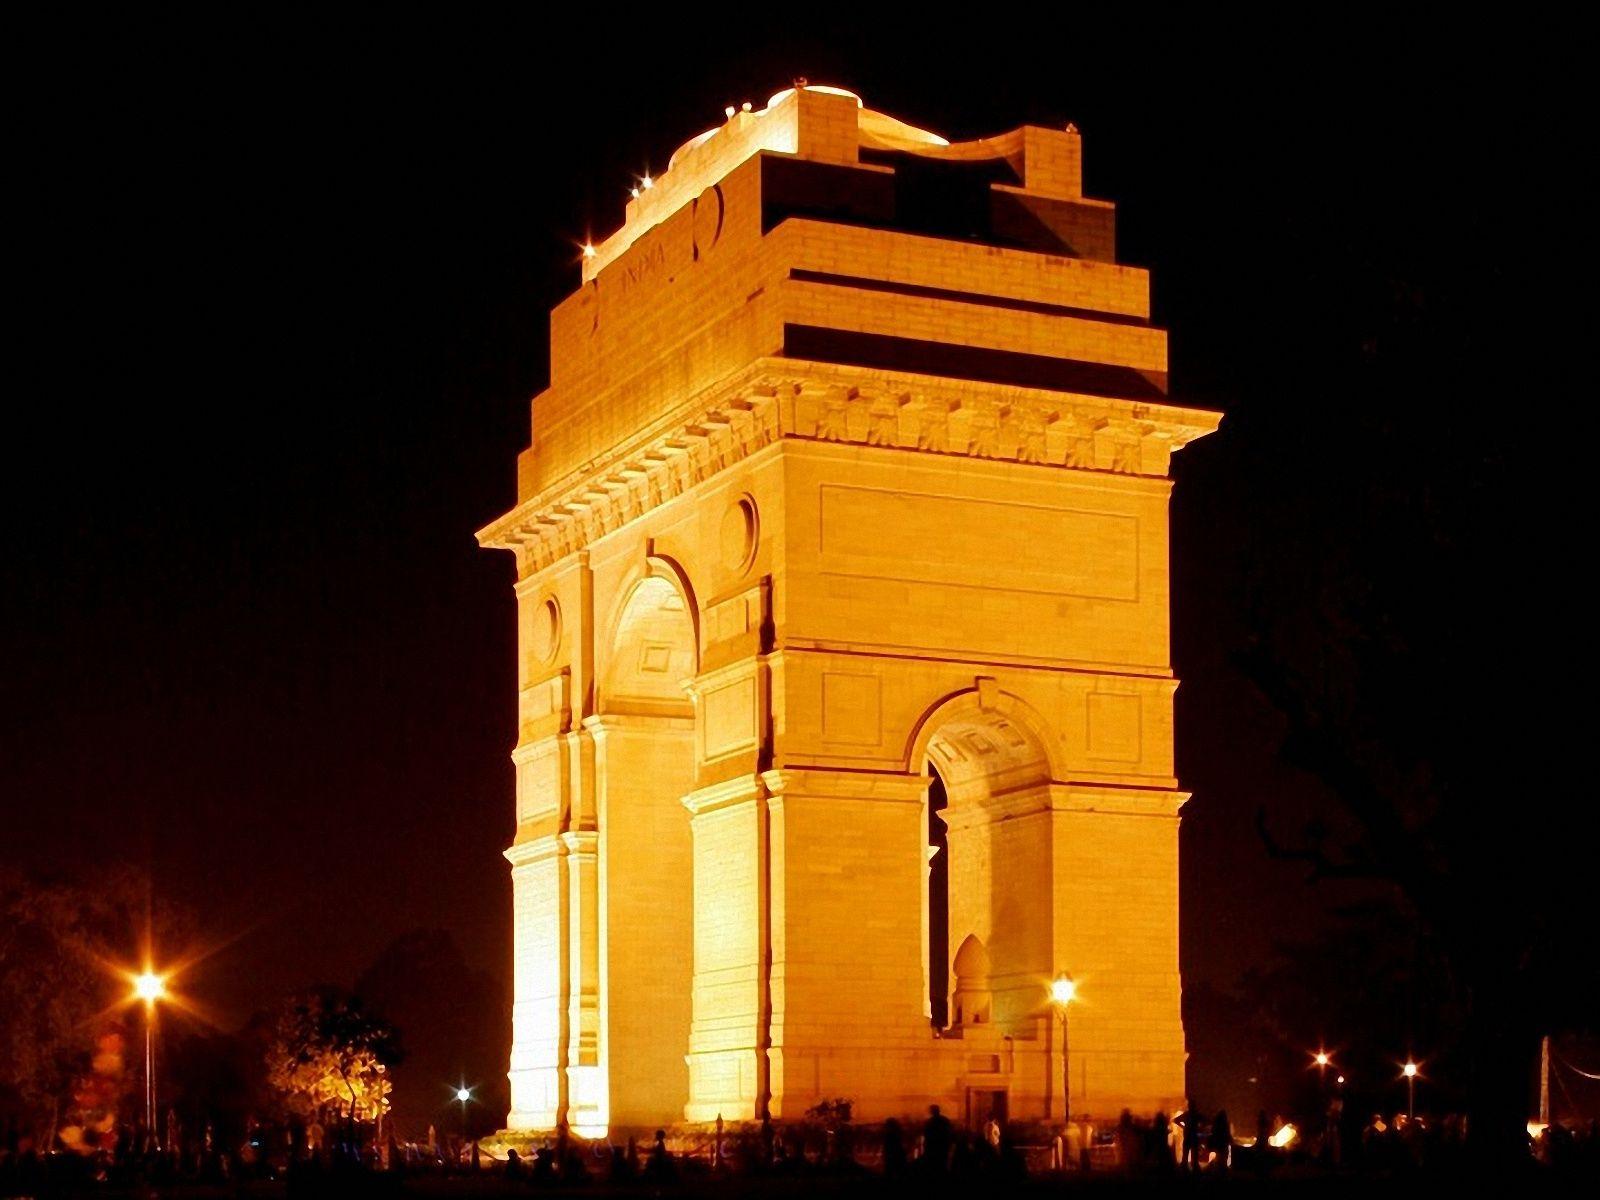 India Gate Square By Night_103579 1600x1200